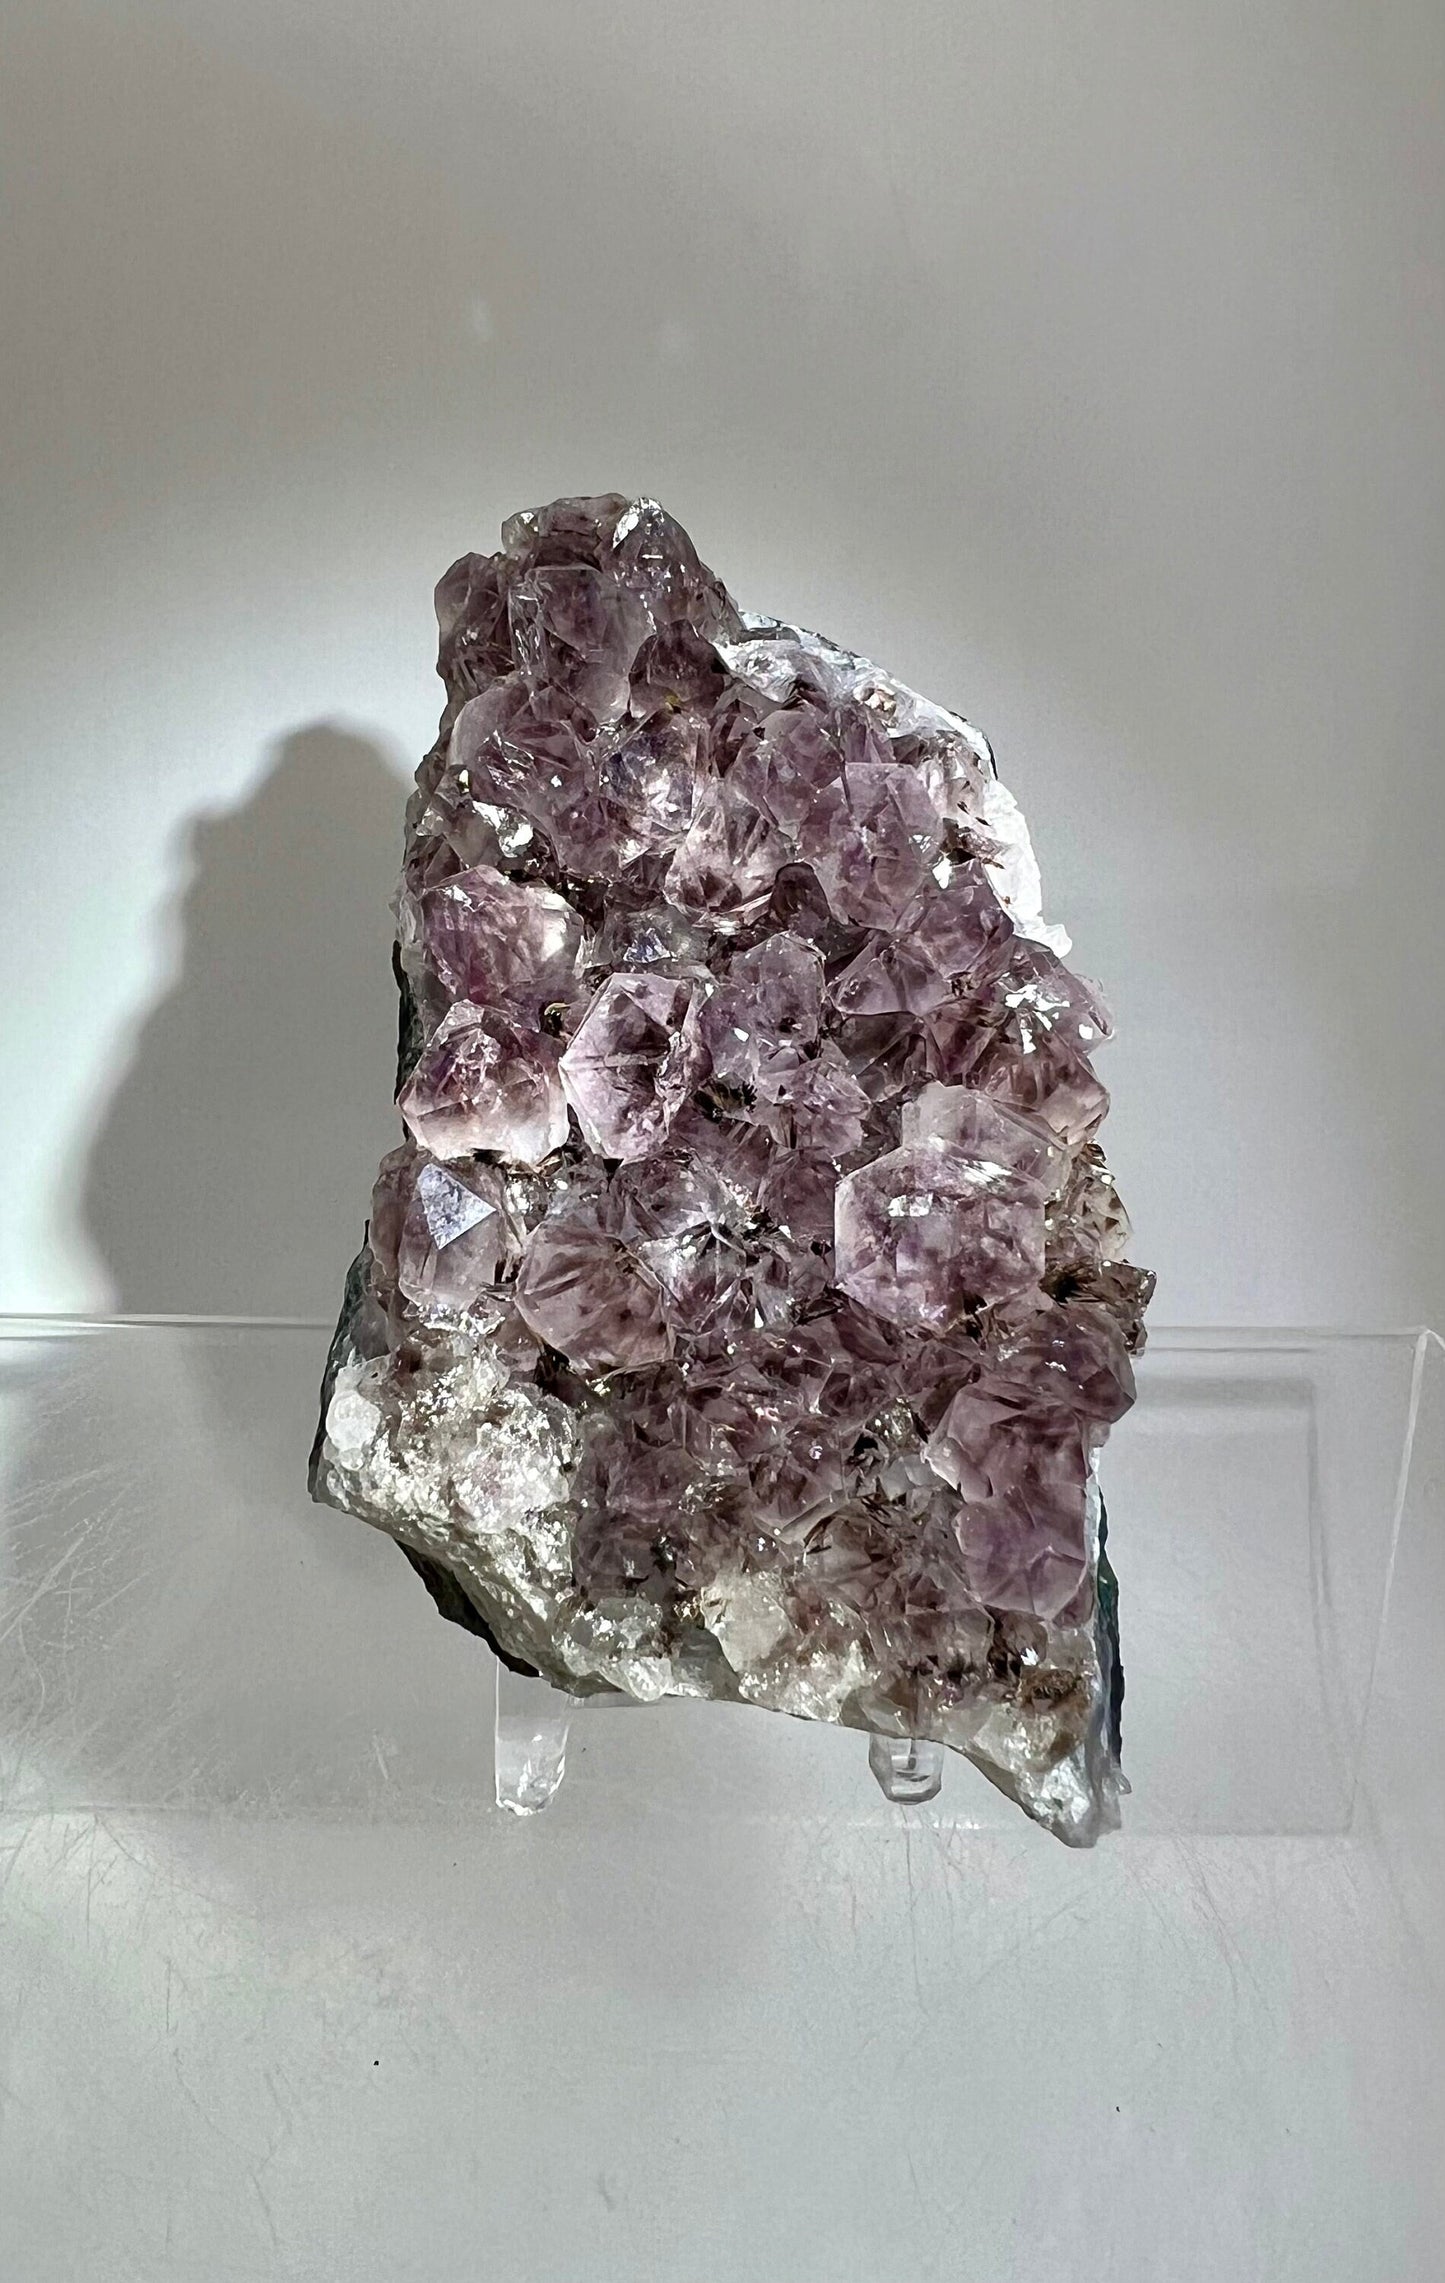 Gorgeous Amethyst Cacoxenite Specimen. Stunning Purple Amethyst With Cacoxenite Inclusions. Beautiful Amethyst Display Cluster.